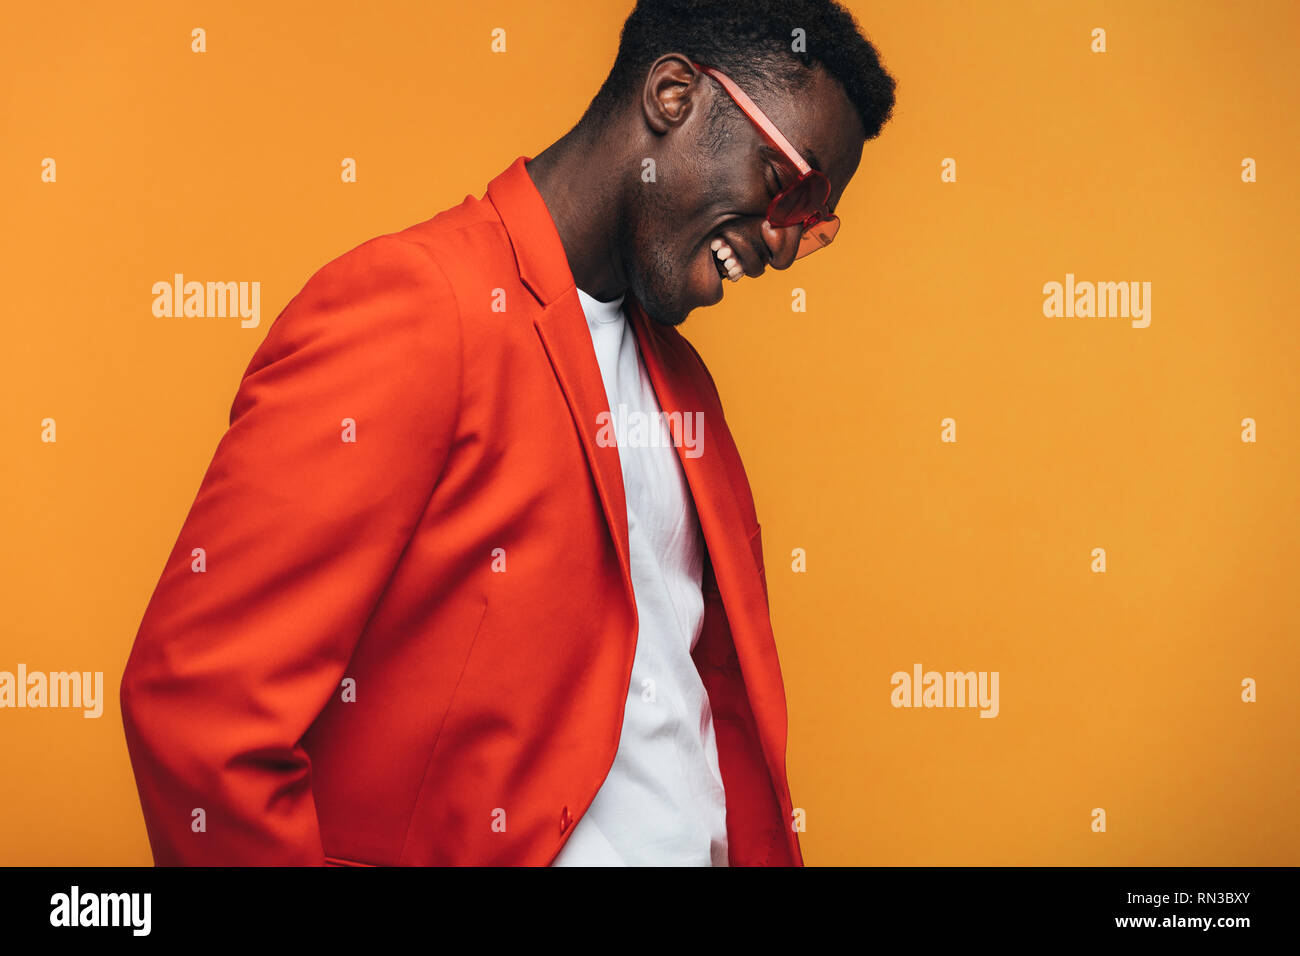 Handsome african male fashion model with sunglasses smiling against orange background. Stylish african man smiling in studio. Stock Photo